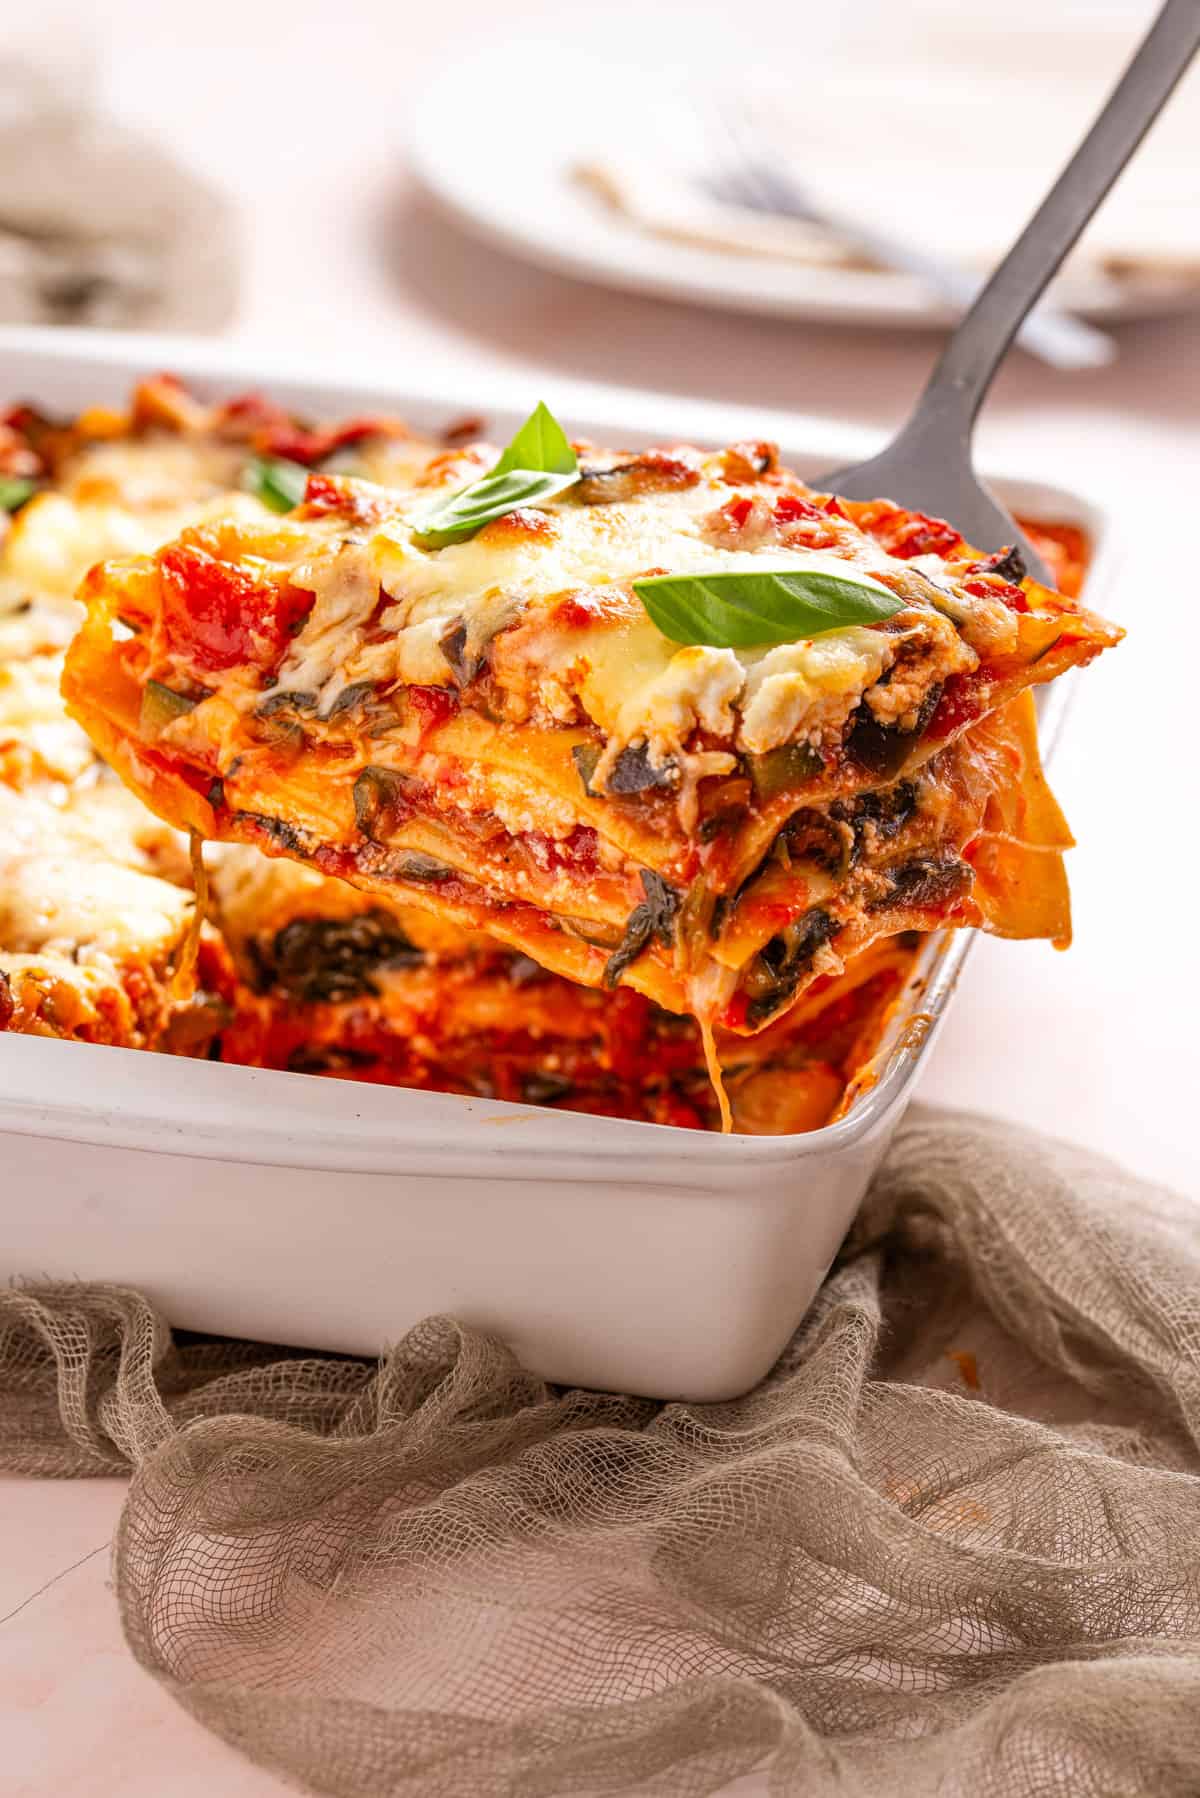 An image of baked cheesy vegetable lasagna in a baking dish.